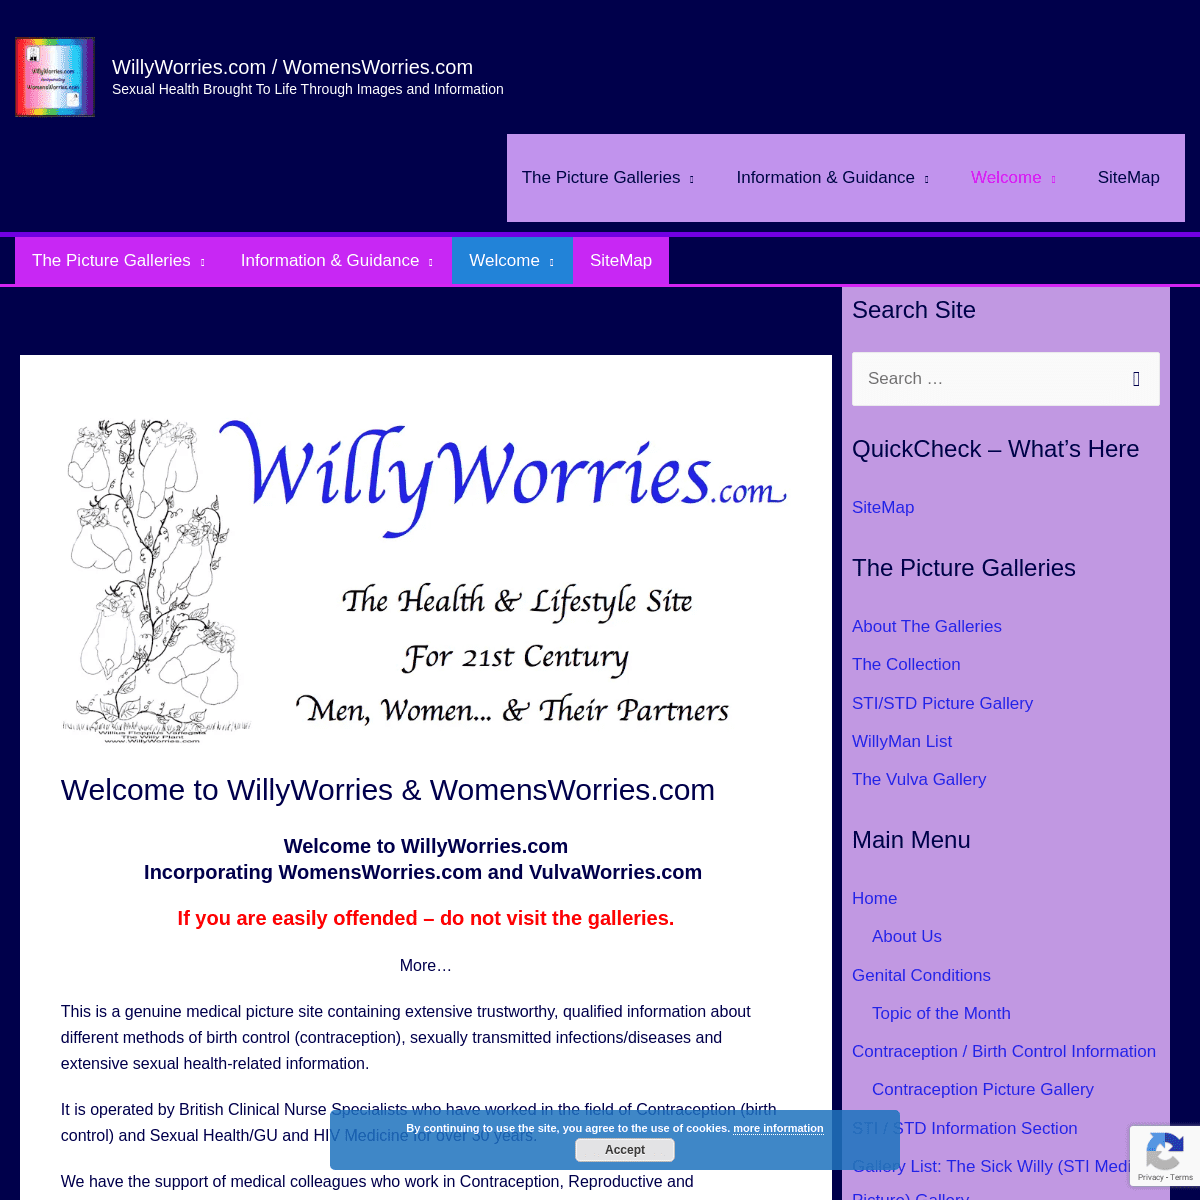 A complete backup of willyworries.com